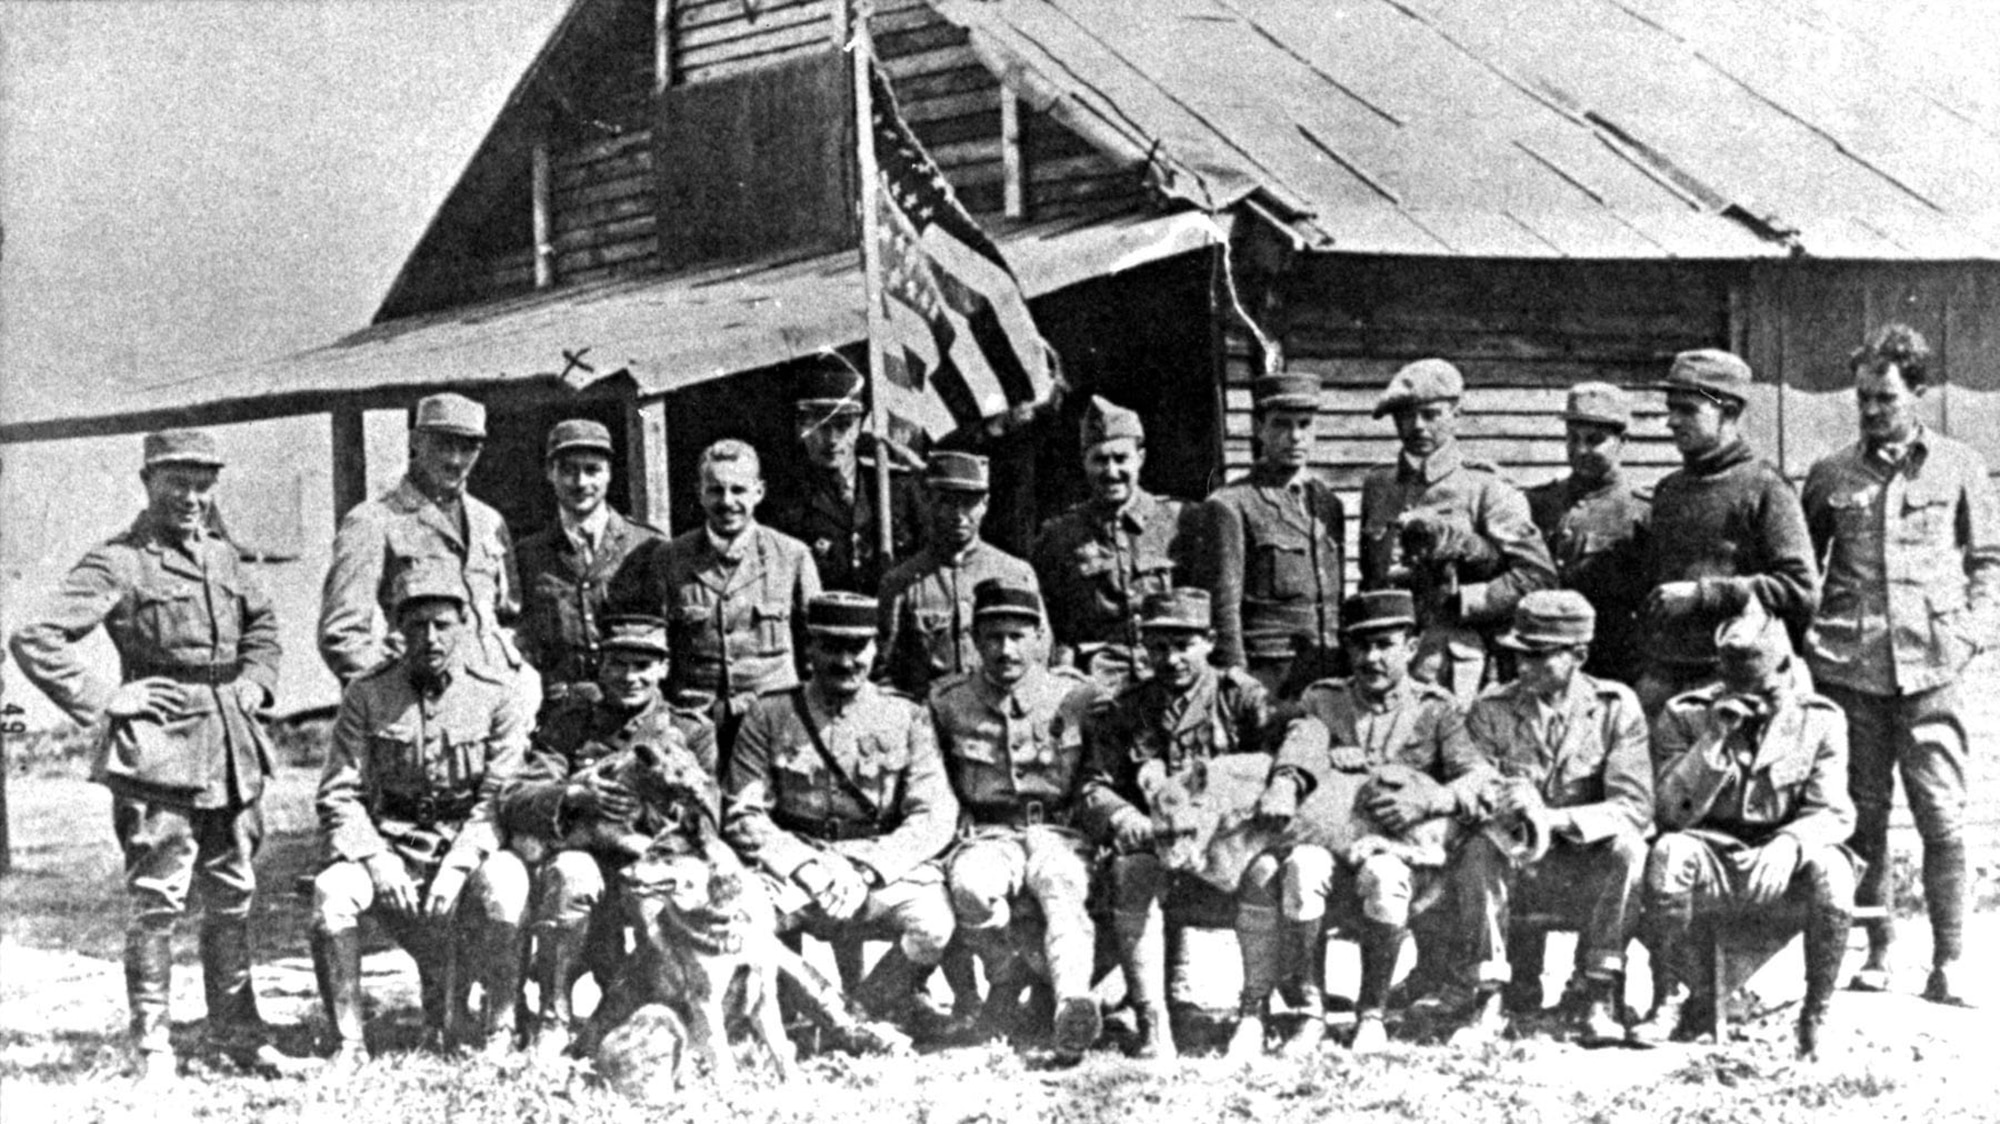 The Escadrille Lafayette in July 1917. Standing, left to right are Soubiron, Doolittle, Campbell, Persons, Bridgman, Dugan, MacMonagle, Lowell, Willis, Jones, Peterson and de Maison-Rouge (French Deputy Commander). Seated, left to right are Hill, Masson with "Soda," Thaw, Thenault (the French Commander), Lufbery with "Whiskey," Johnson, Bigelow and Rockwell. (U.S. Air Force photo)